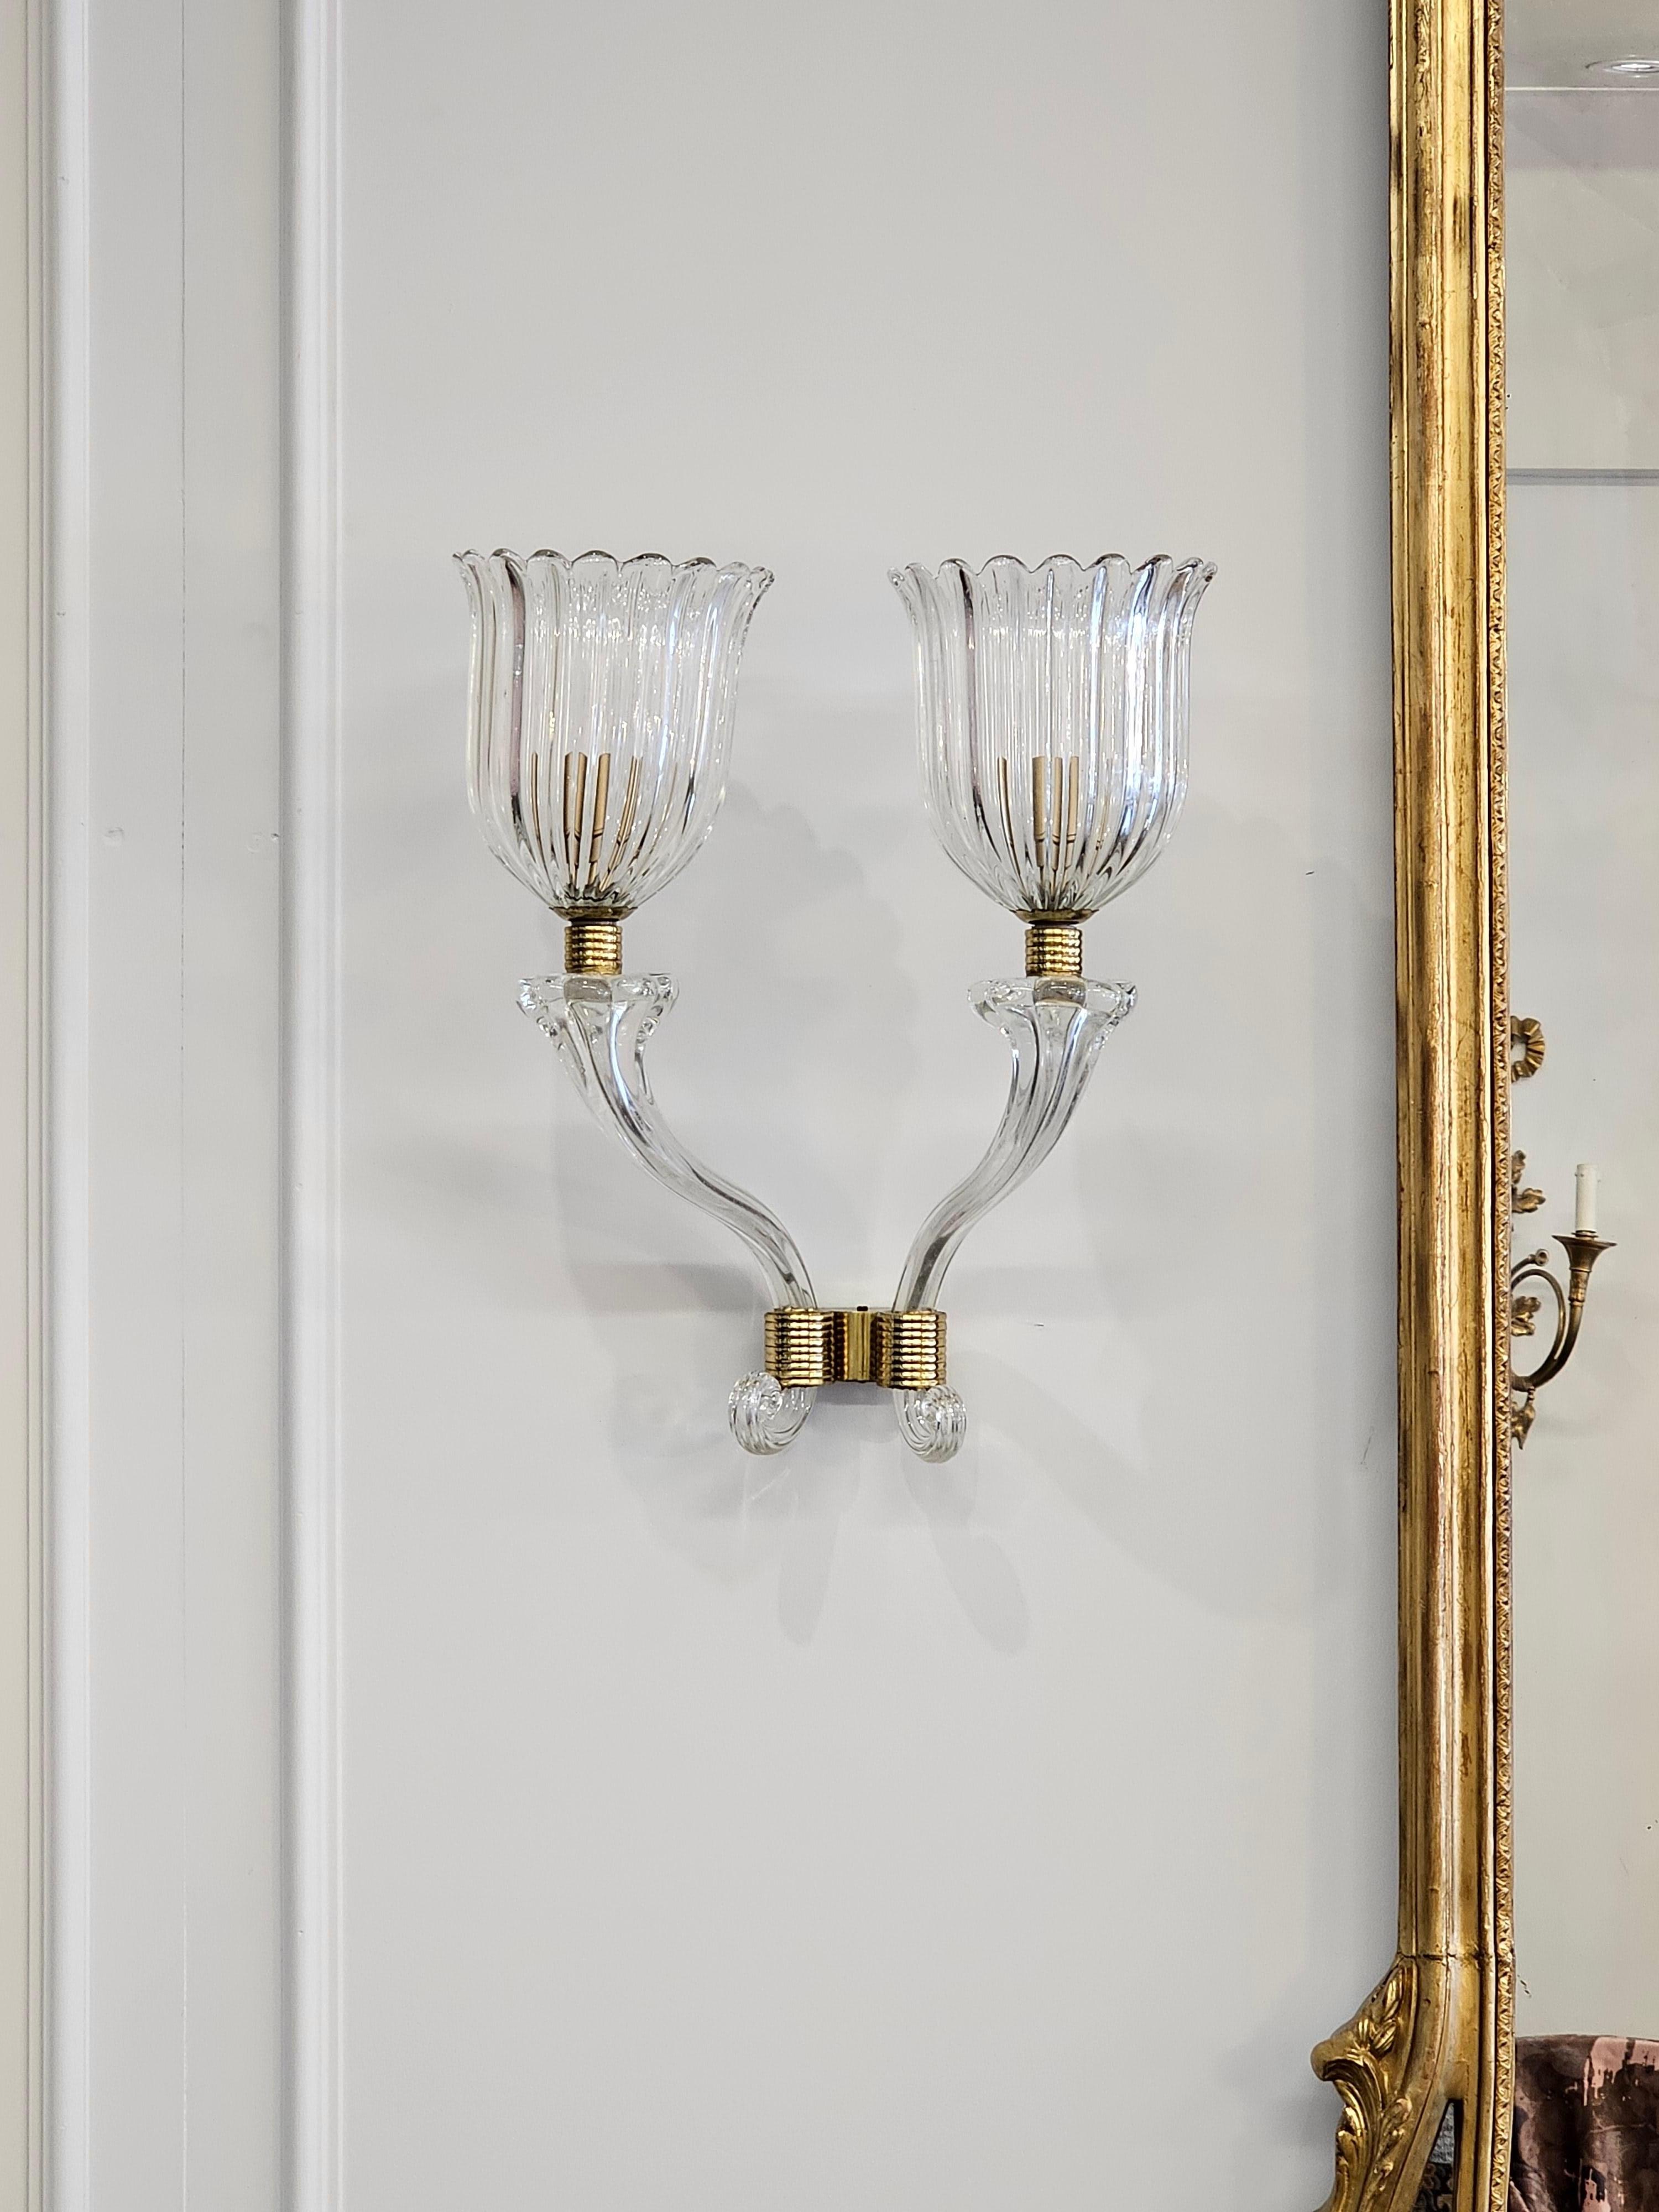 Pair of 1940s Murano Glass Tulip Cup Wall Sconces by Barovier & Toso In Good Condition For Sale In Toorak, VIC